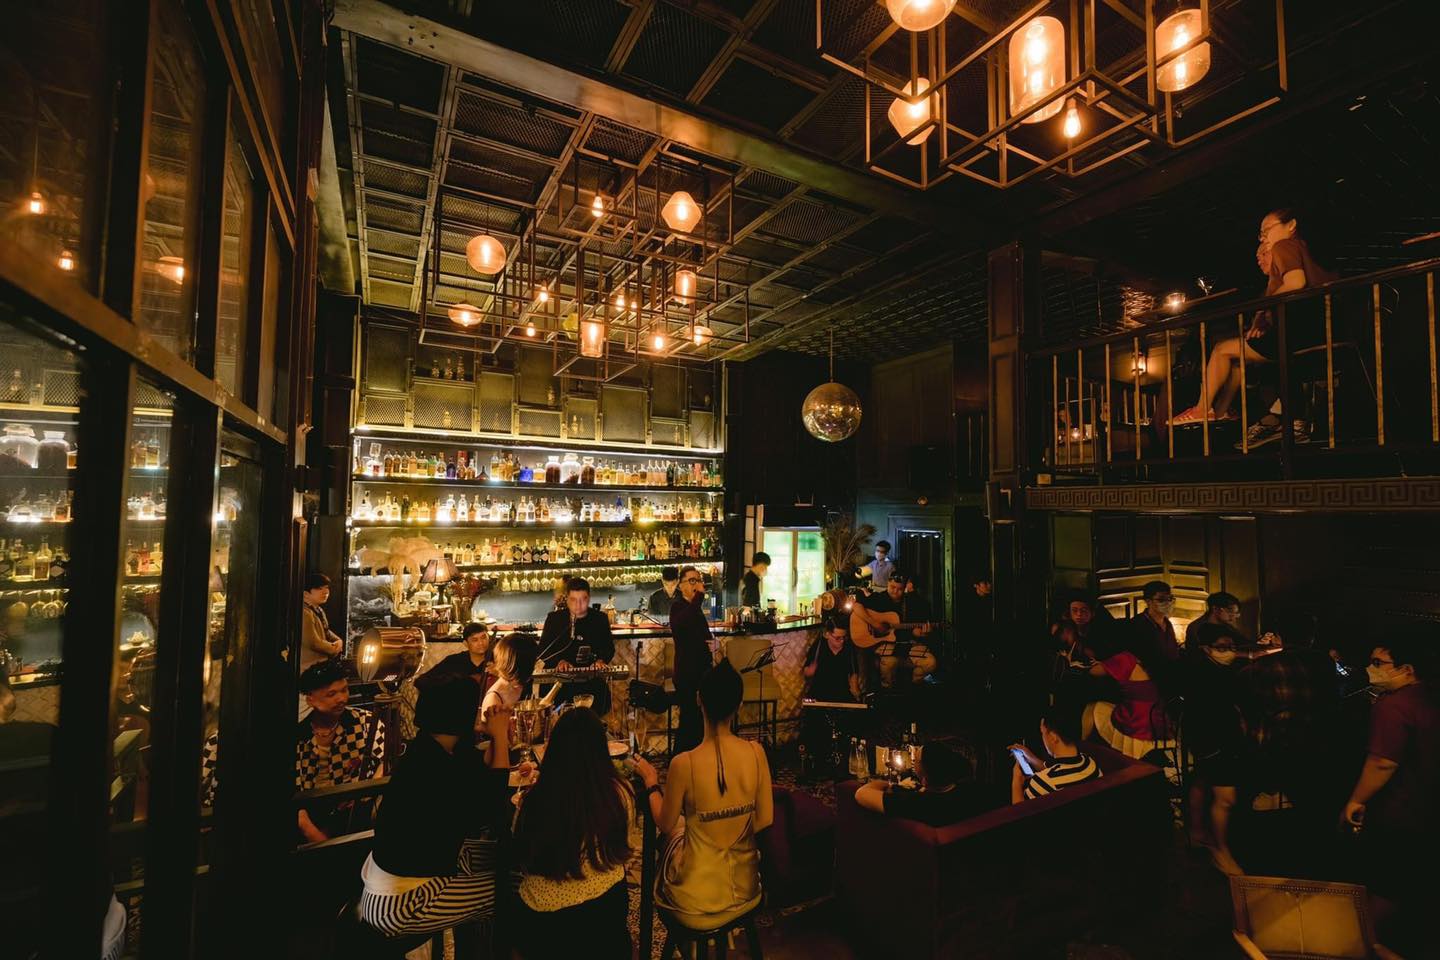 Snuffbox Lounge is like a secret hideout that feels like those hidden bars from the 1920s